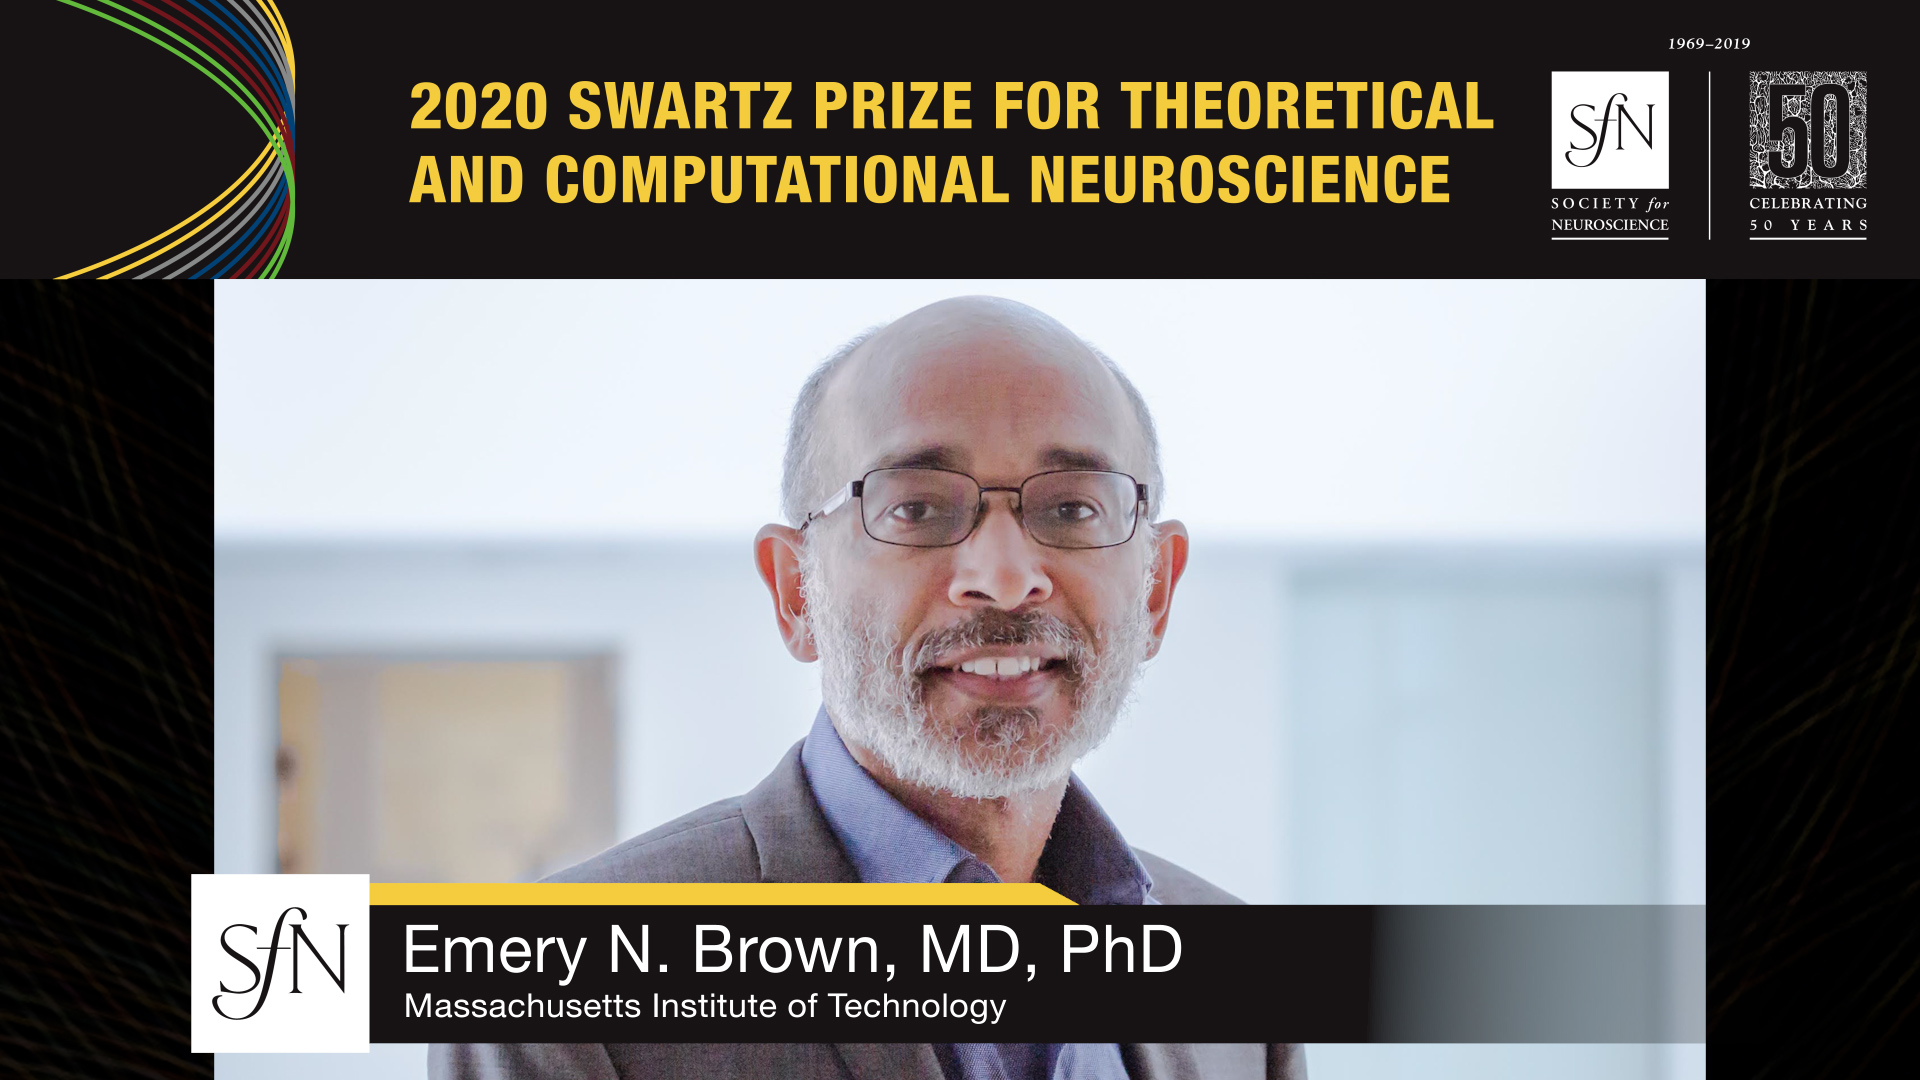 2020 Swartz Prize for Theoretical and Computational Neuroscience award winner graphic, image of Emery N Brown, MD PhD Massachusetts Institute of Technology